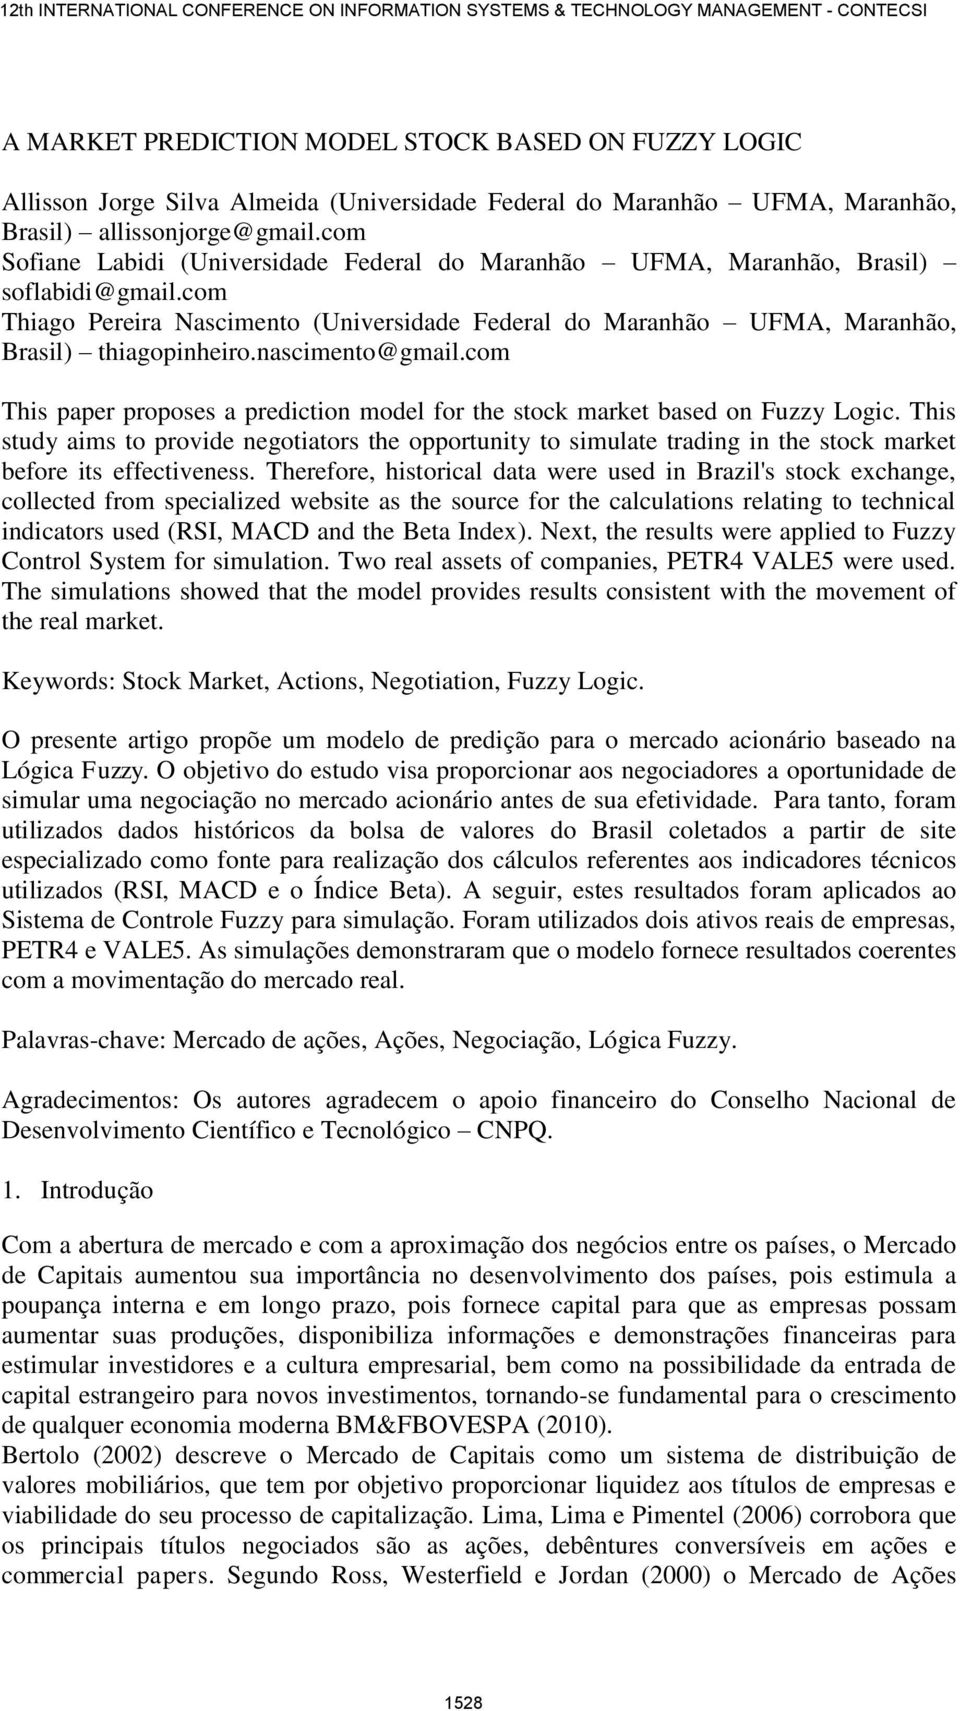 nascimento@gmail.com This paper proposes a prediction model for the stock market based on Fuzzy Logic.